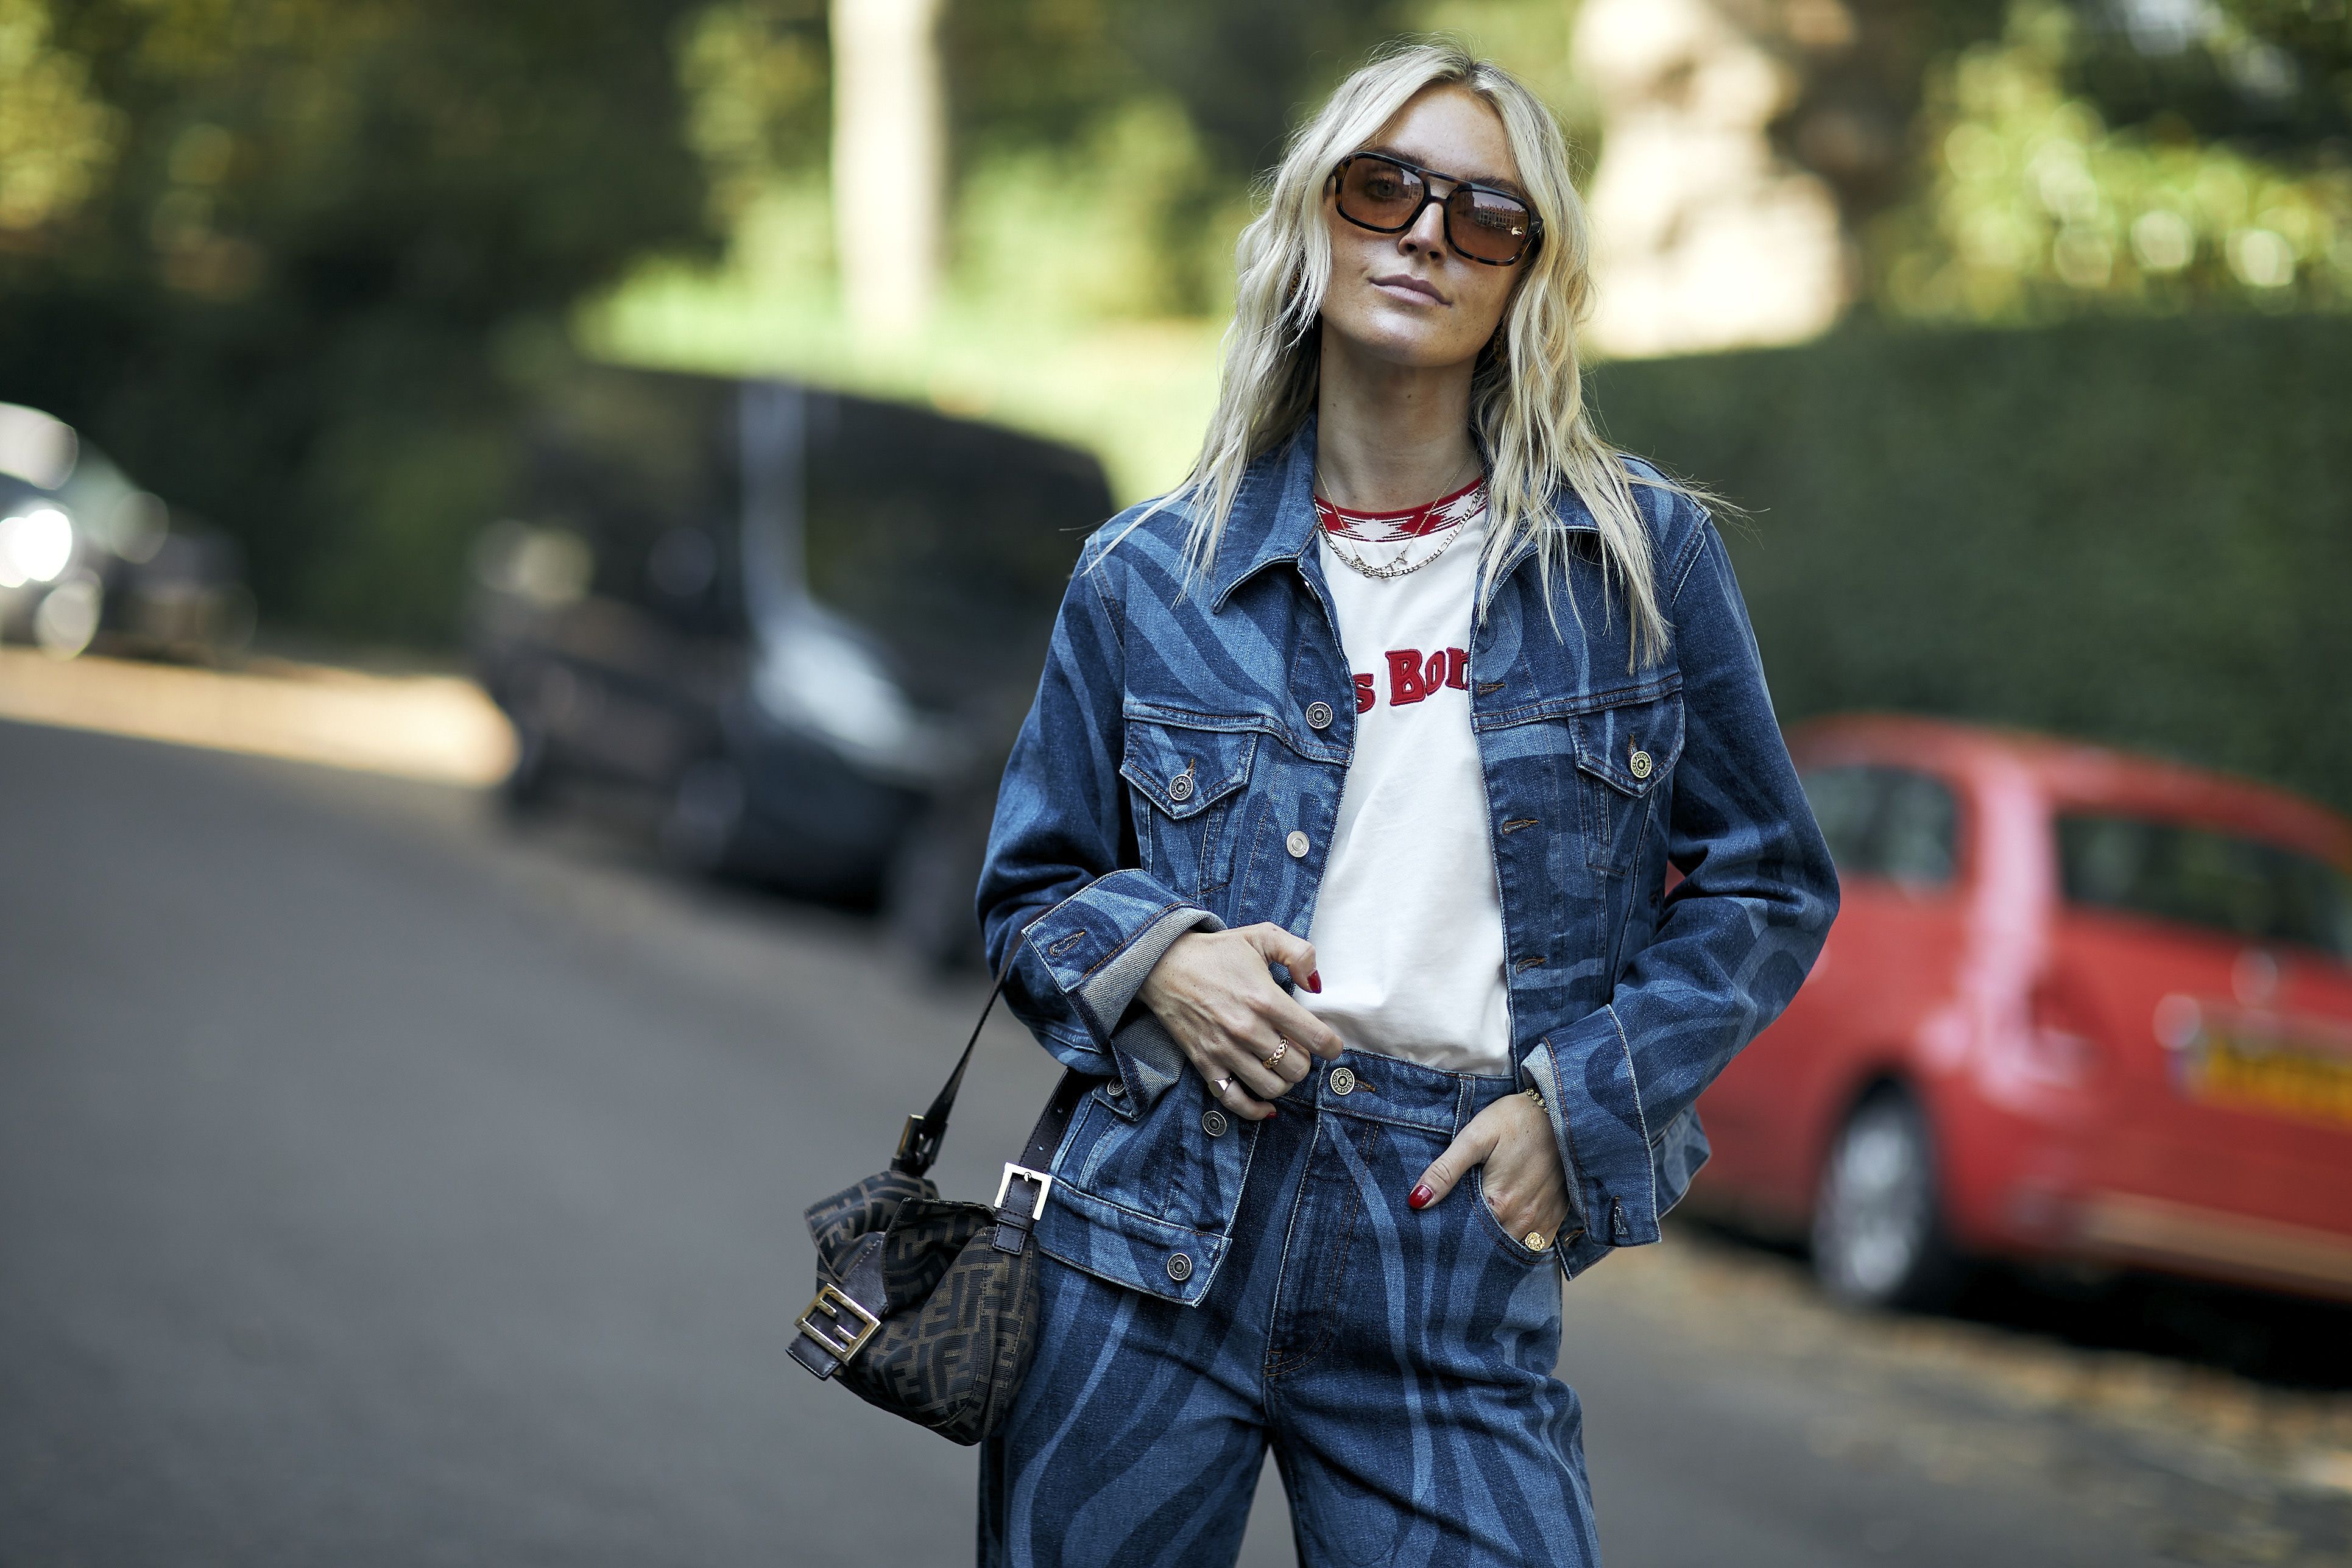 10 Editor-Approved Ways to Wear Colorful Denim This Fall